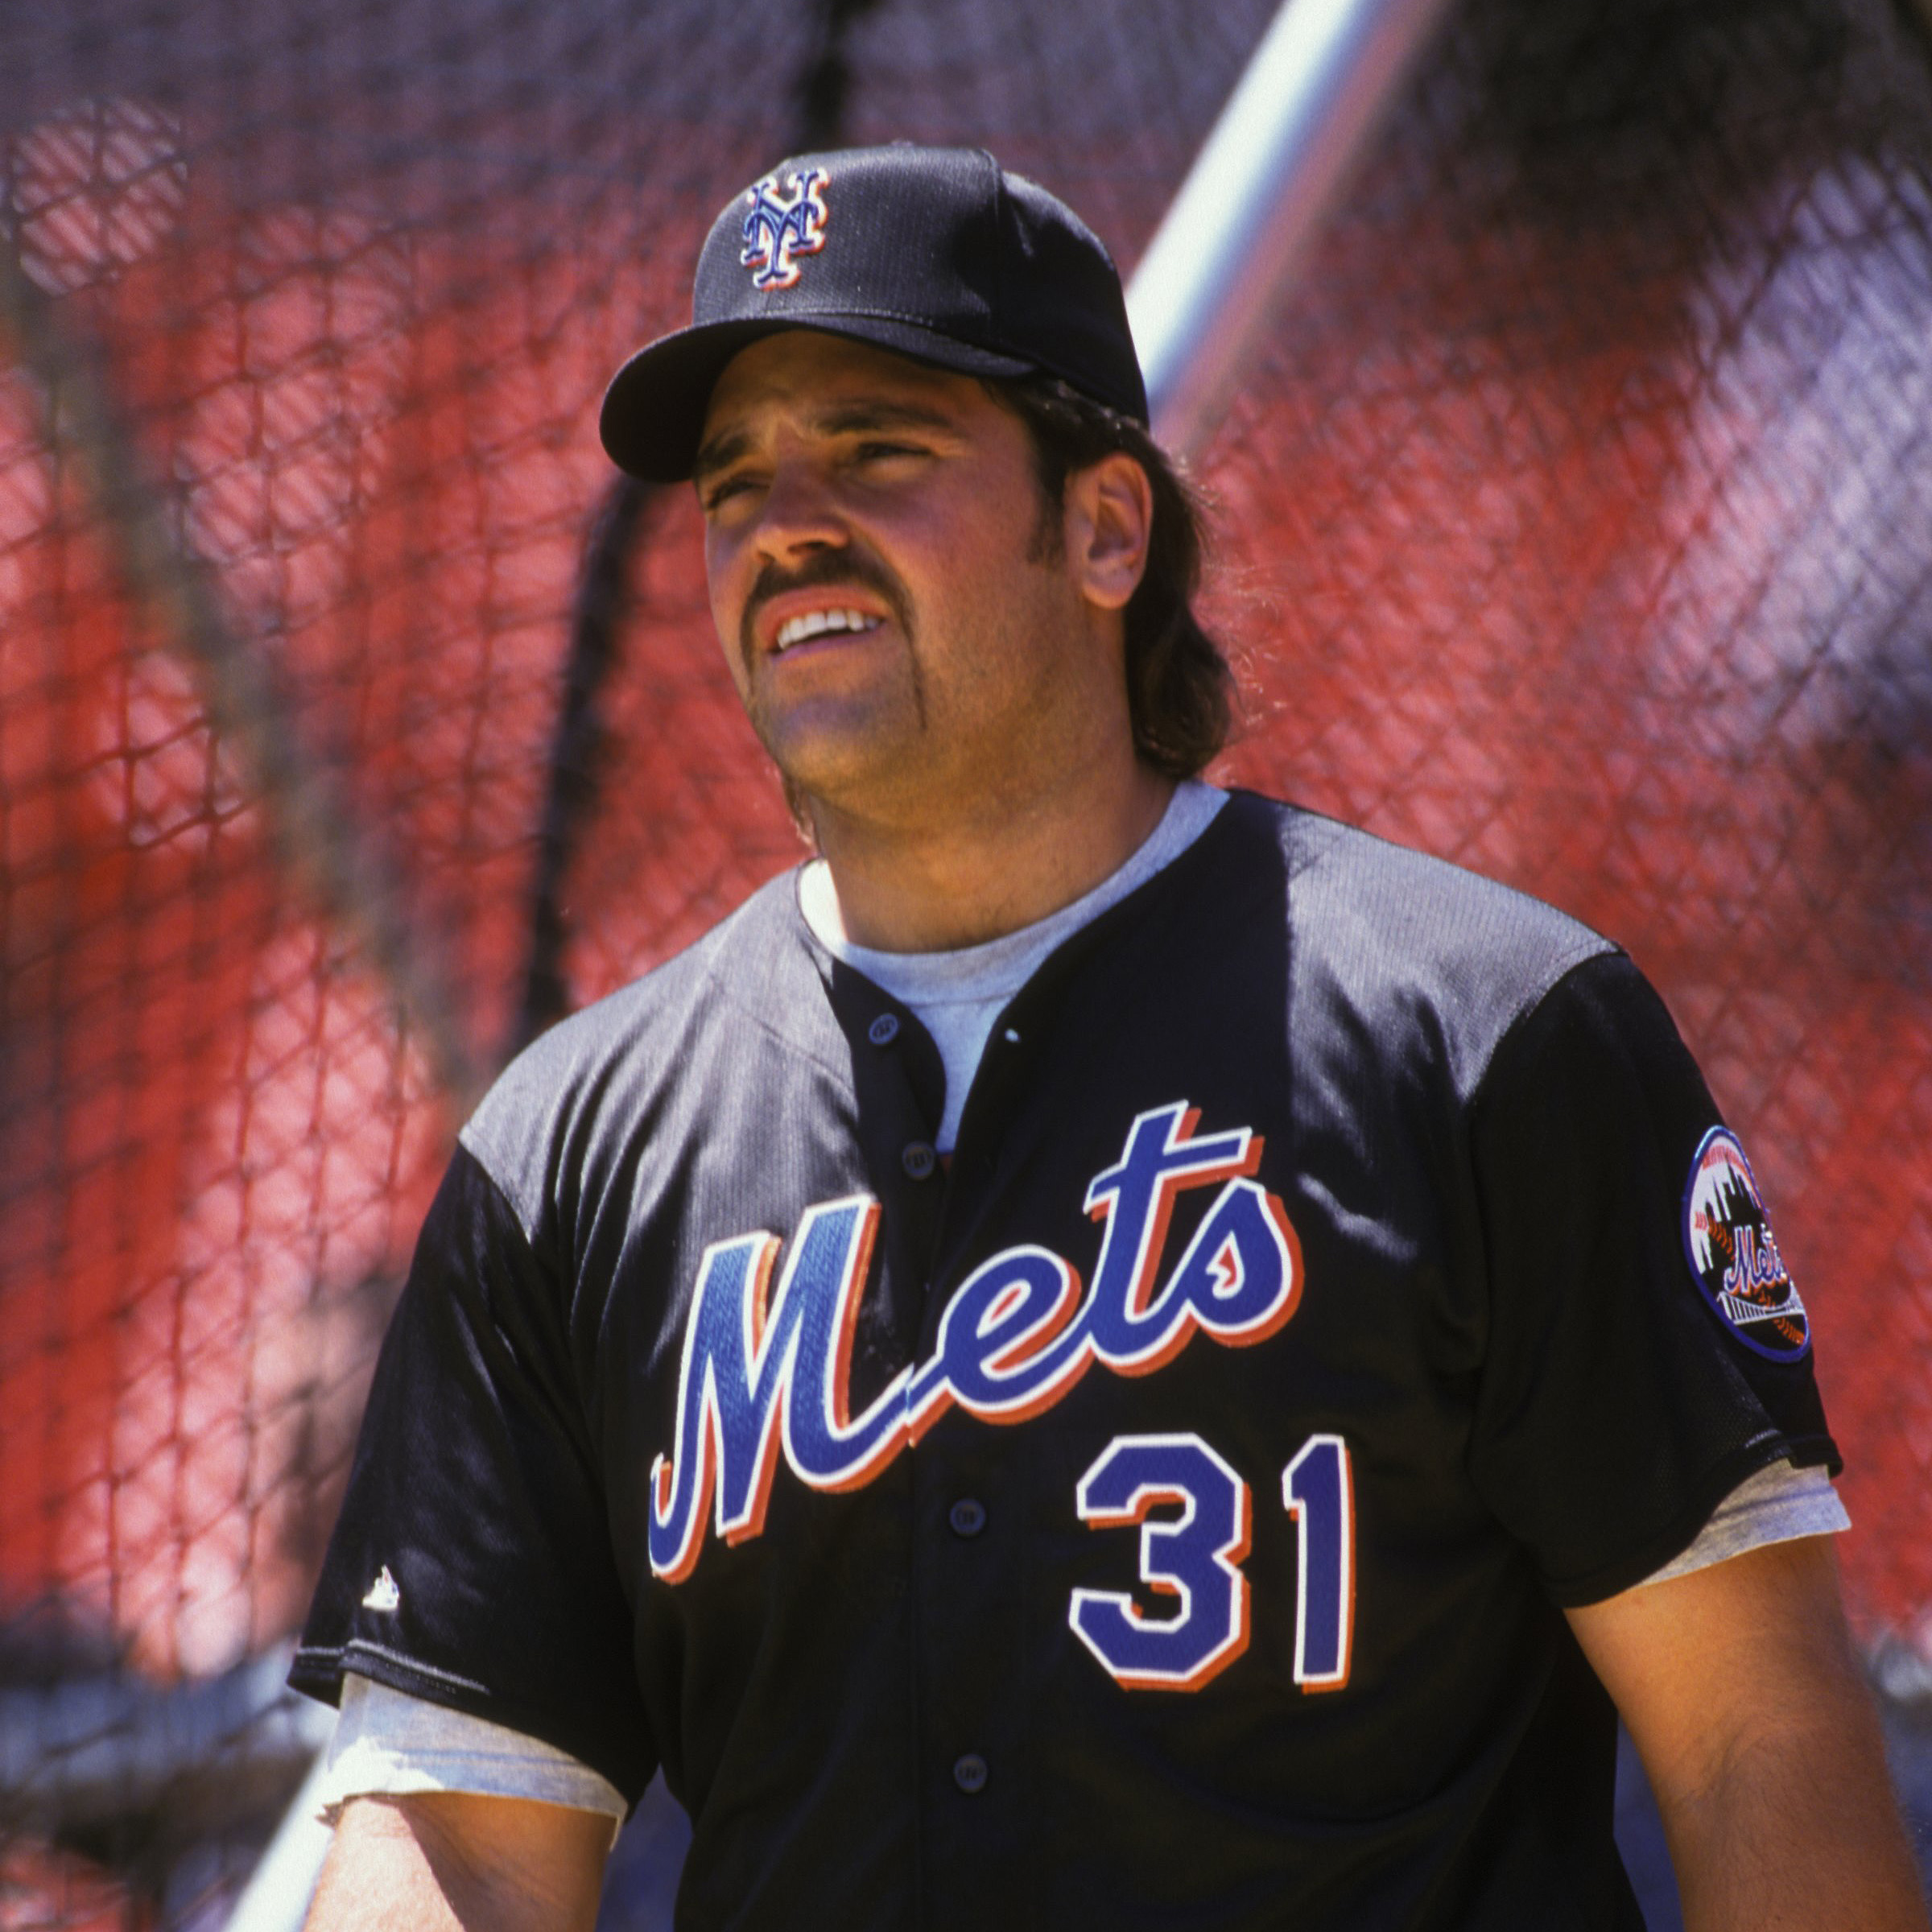 Some Thoughts on the Mets Reviving the Black Uniforms